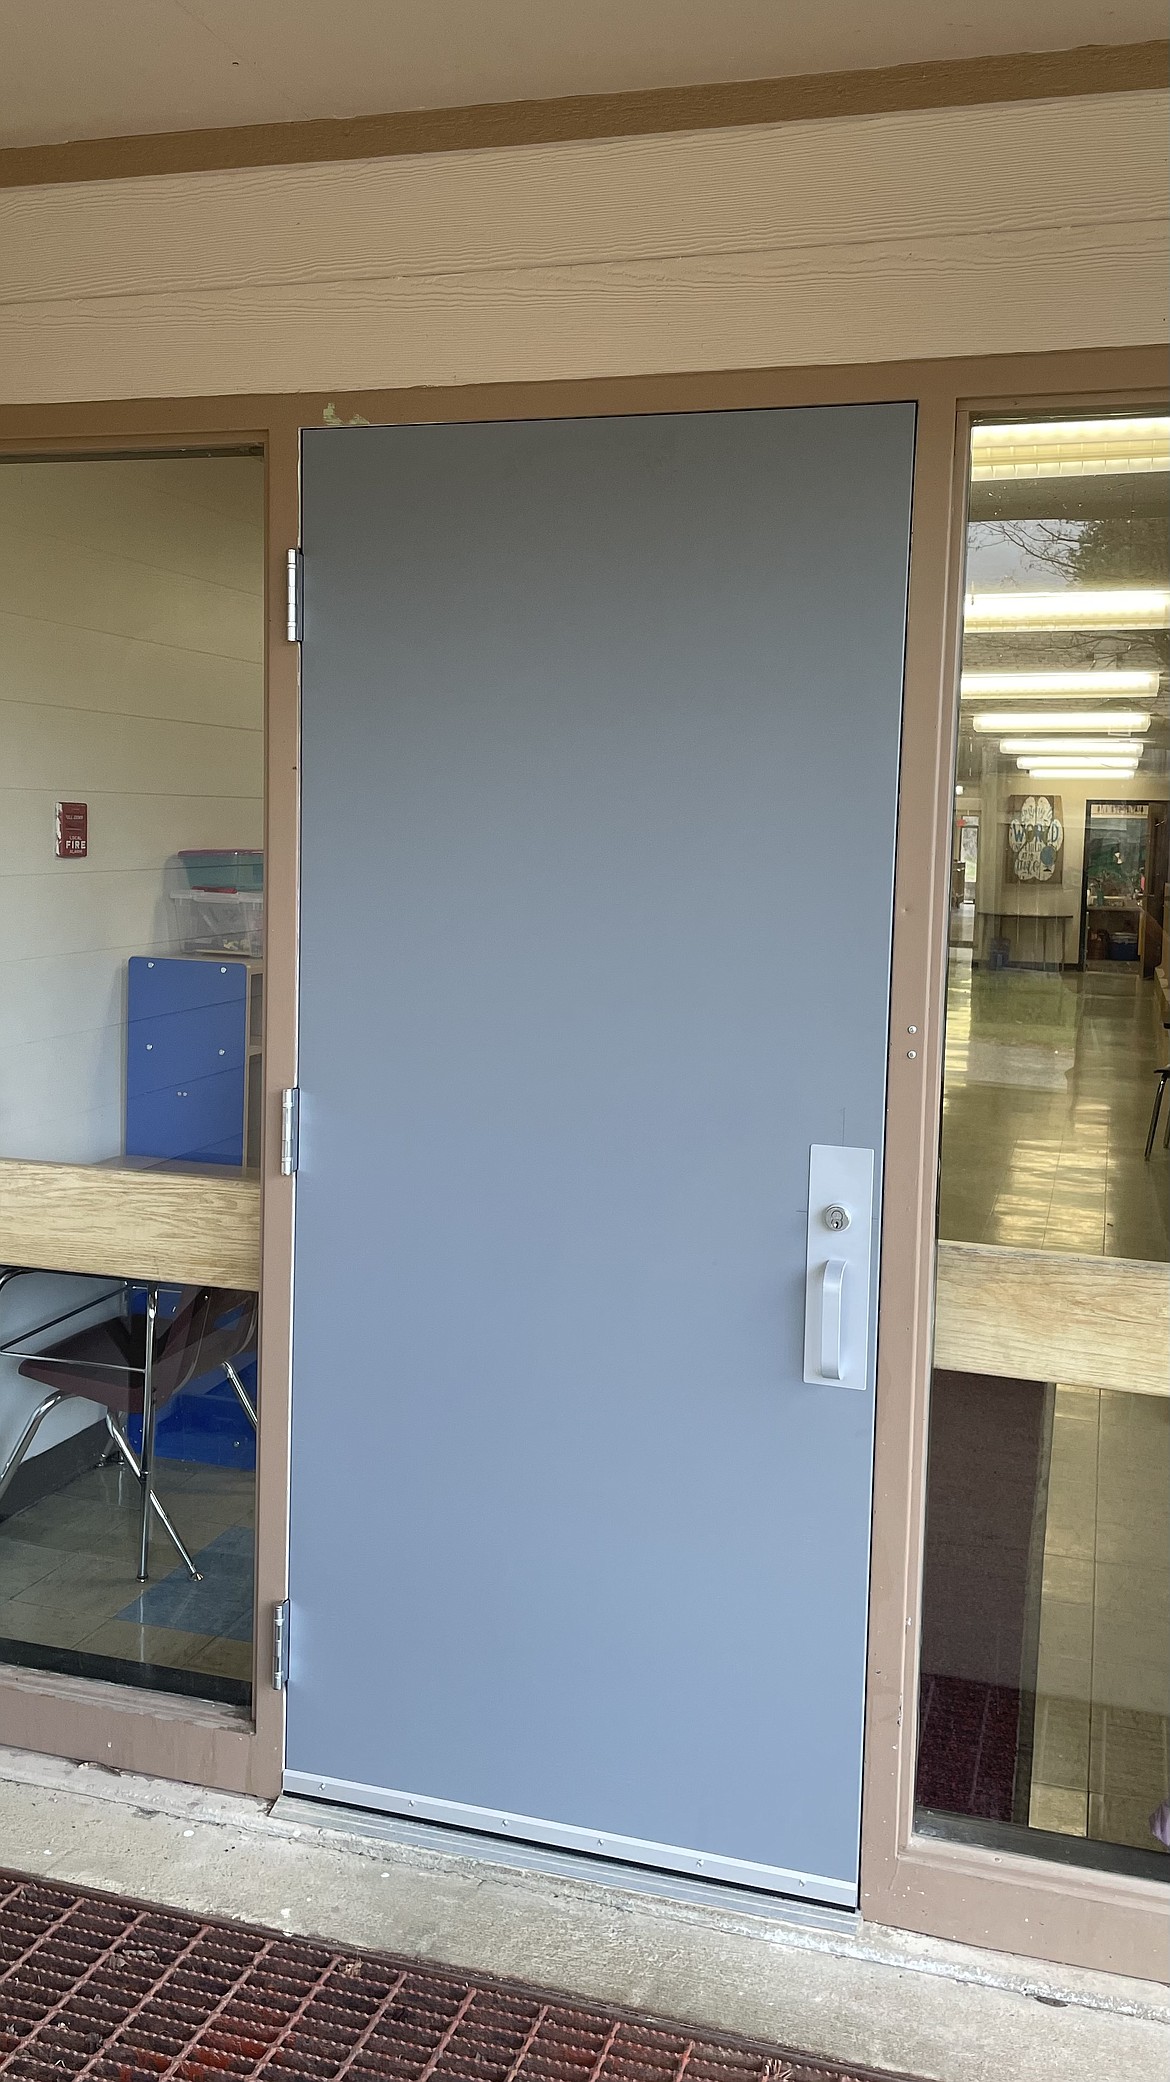 Canyon Elementary School recently replaced the building's hollow wooden doors with solid fire-rated doors.